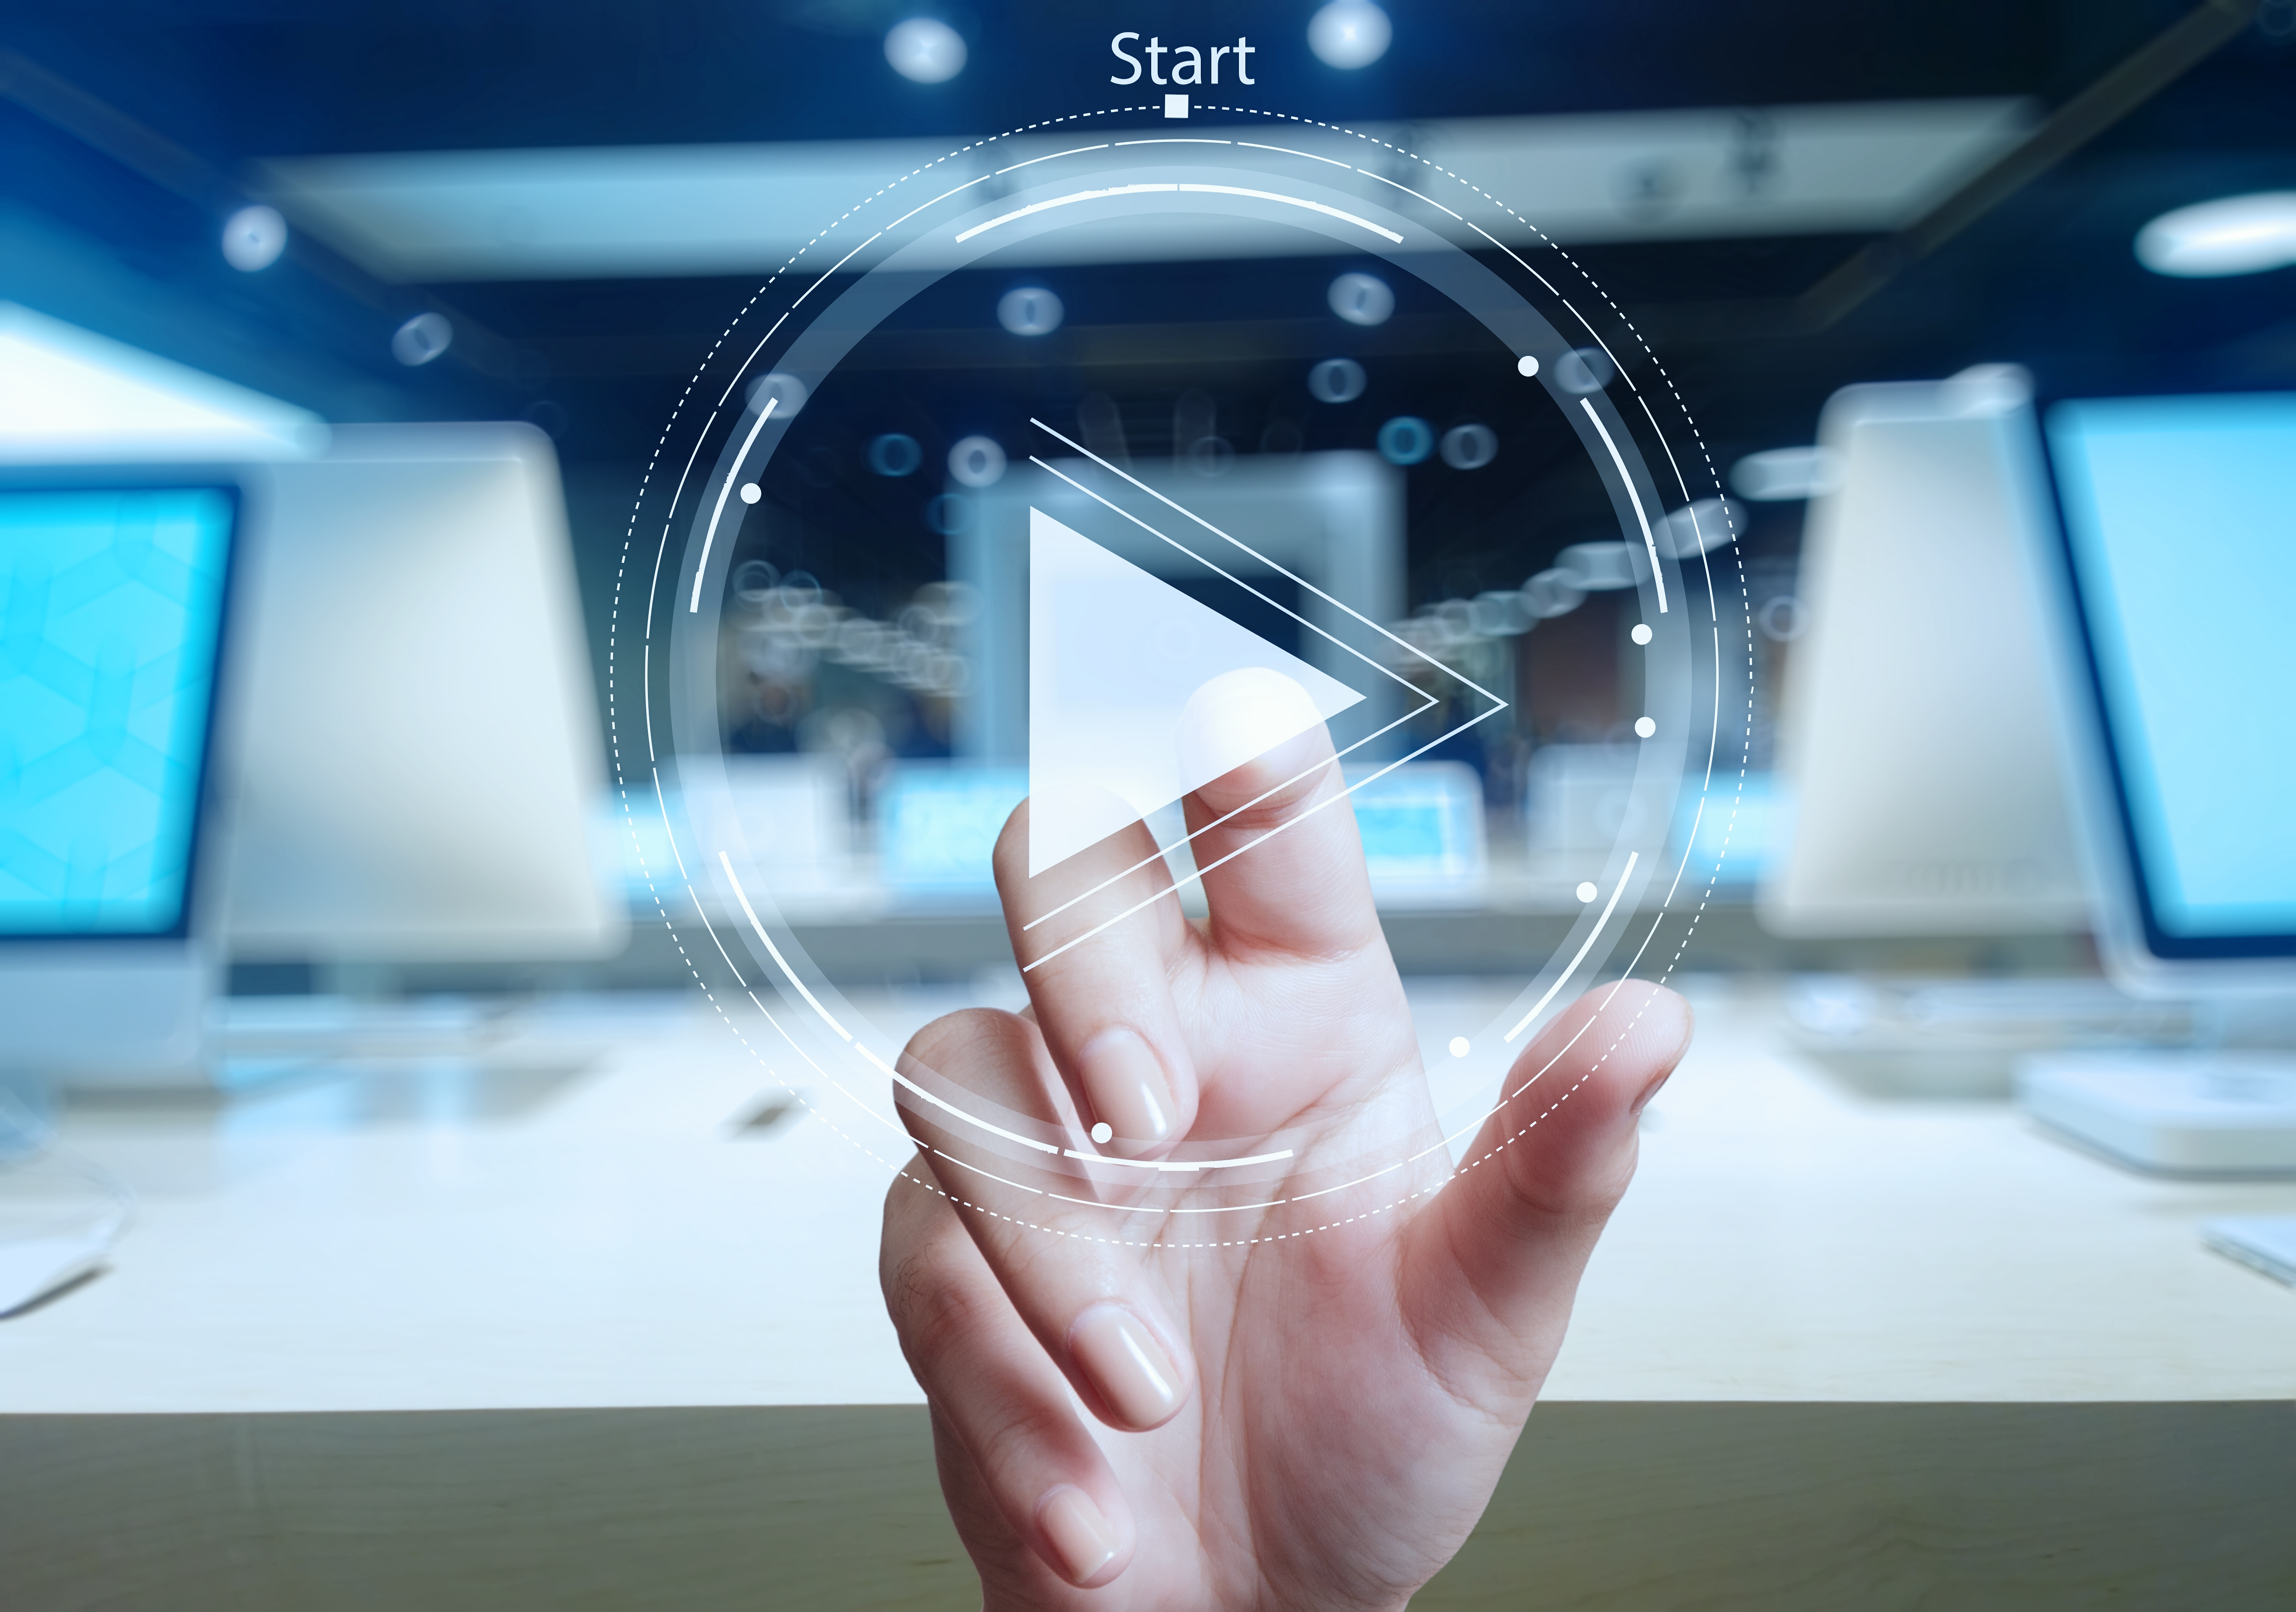 Video marketing could be your game changer